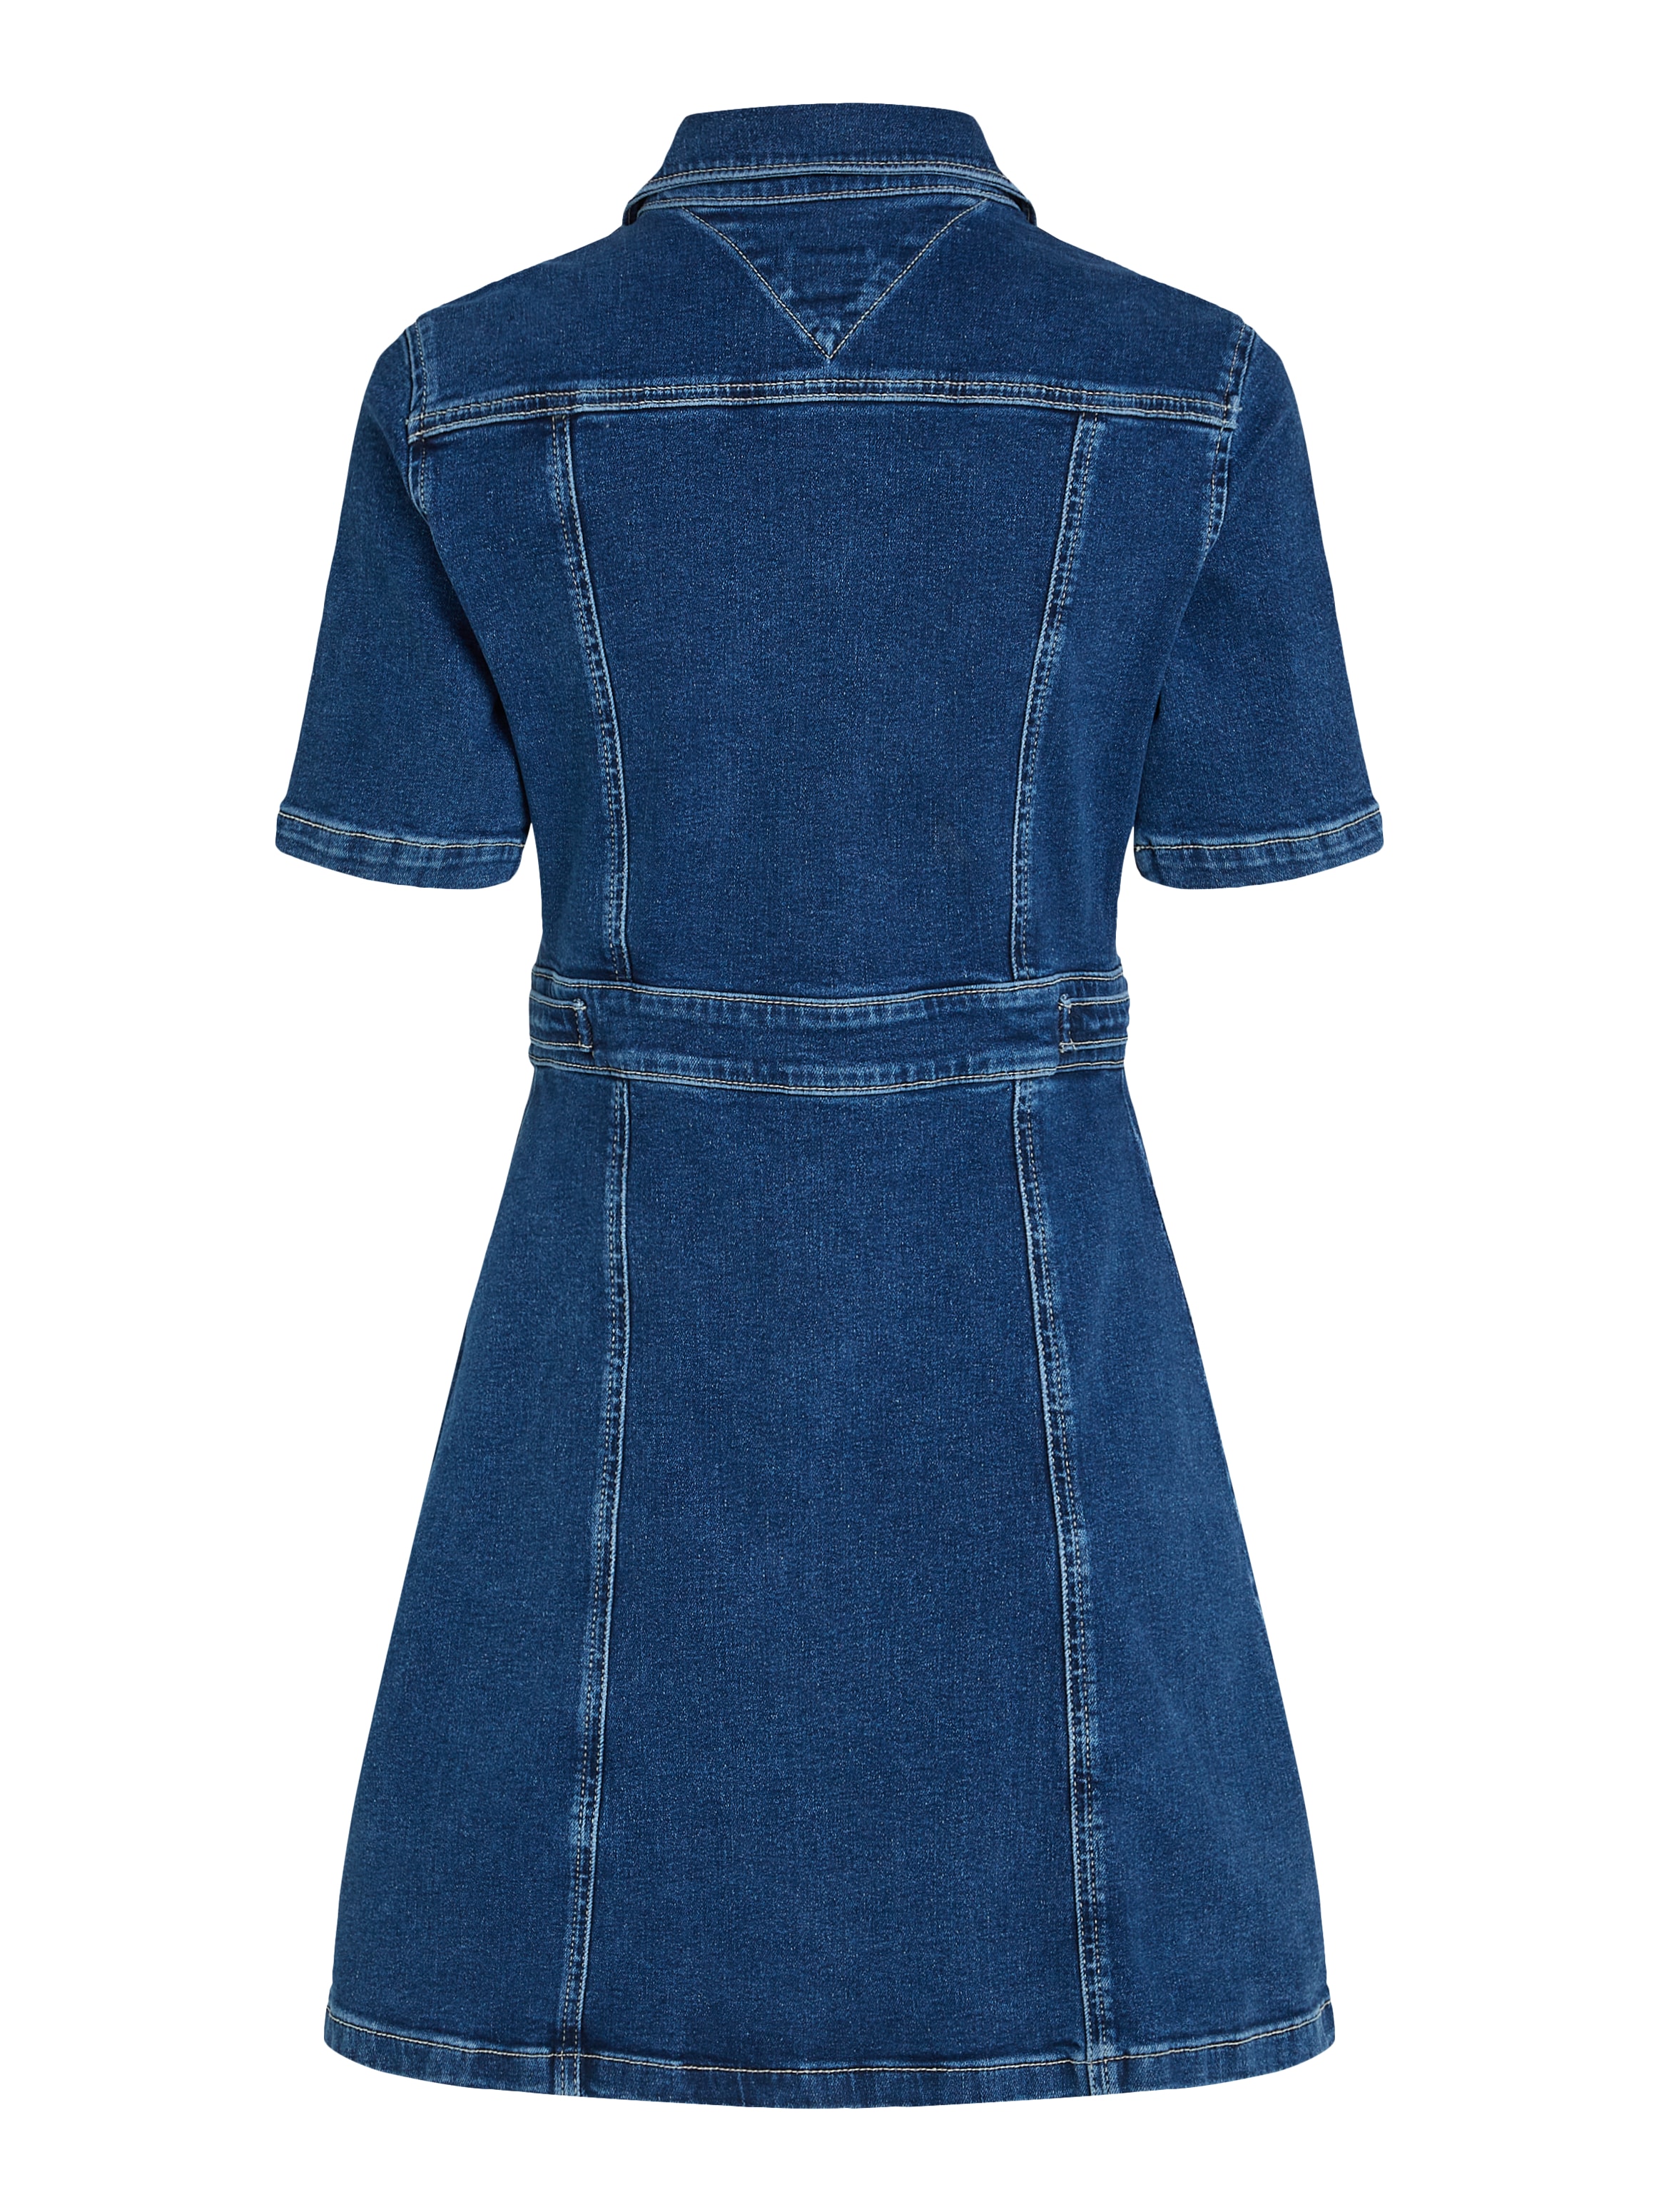 Tommy Jeans Blusenkleid »FLARED SS DRESS CH4253«, in modischer Flared Form